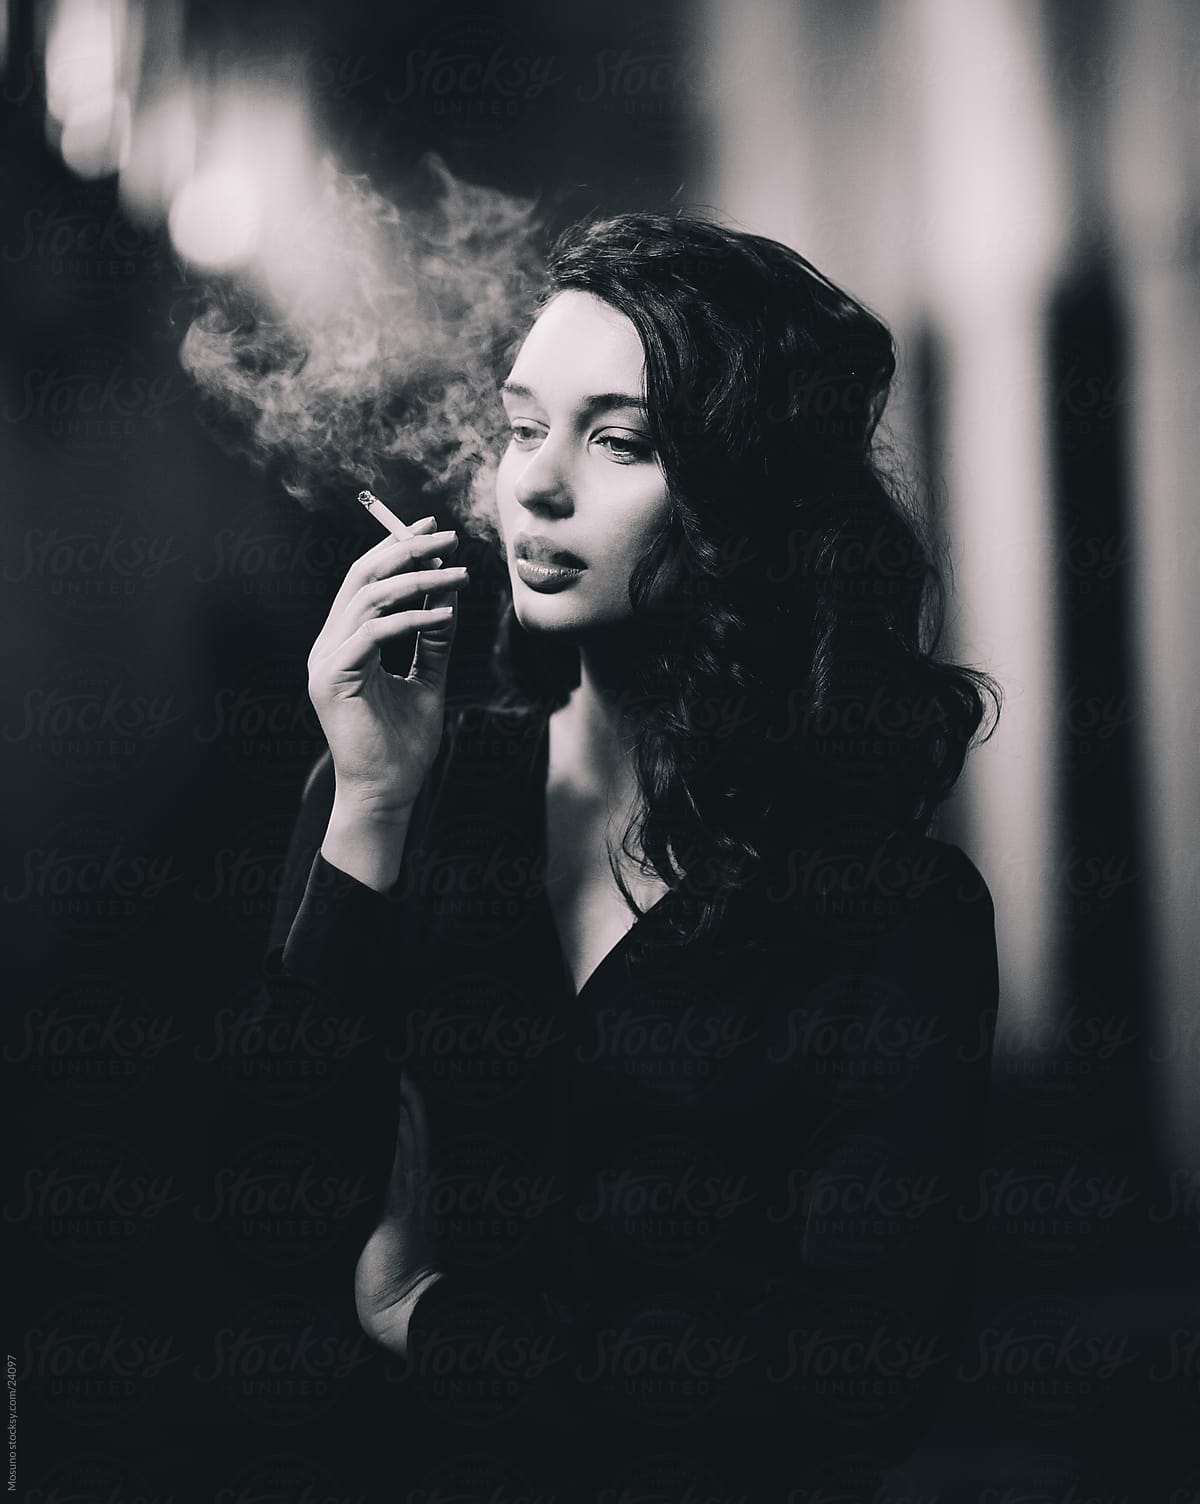 Beautiful woman posing with a cigarette.